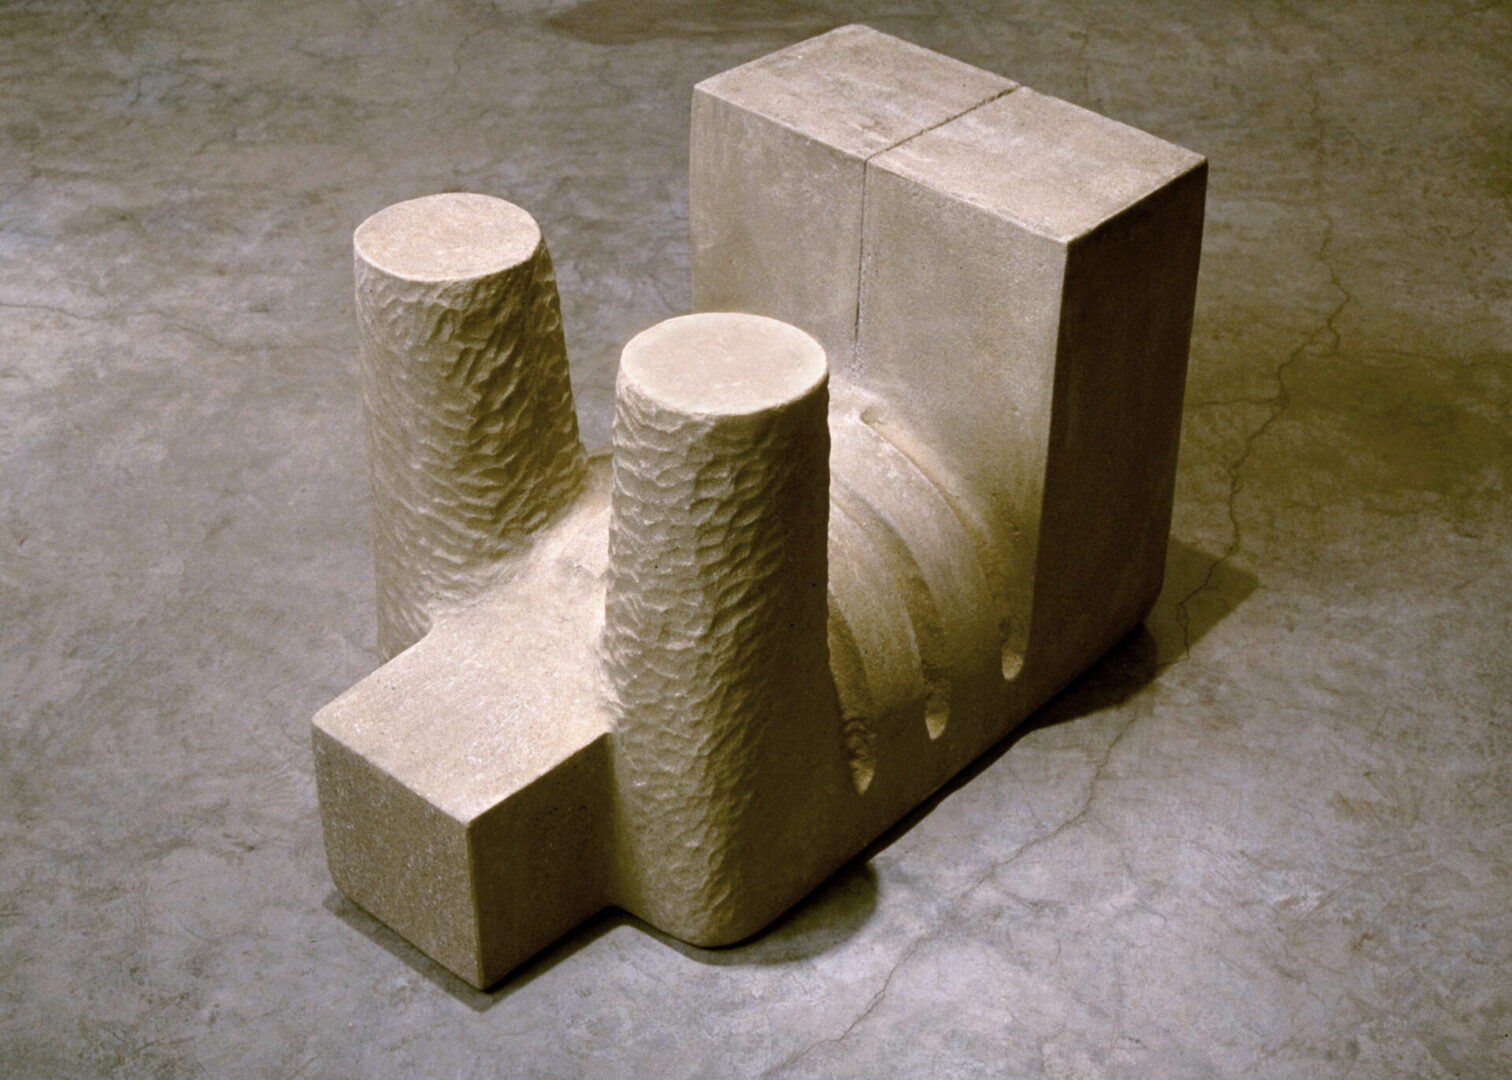 A concrete block with two pillars on top of it.